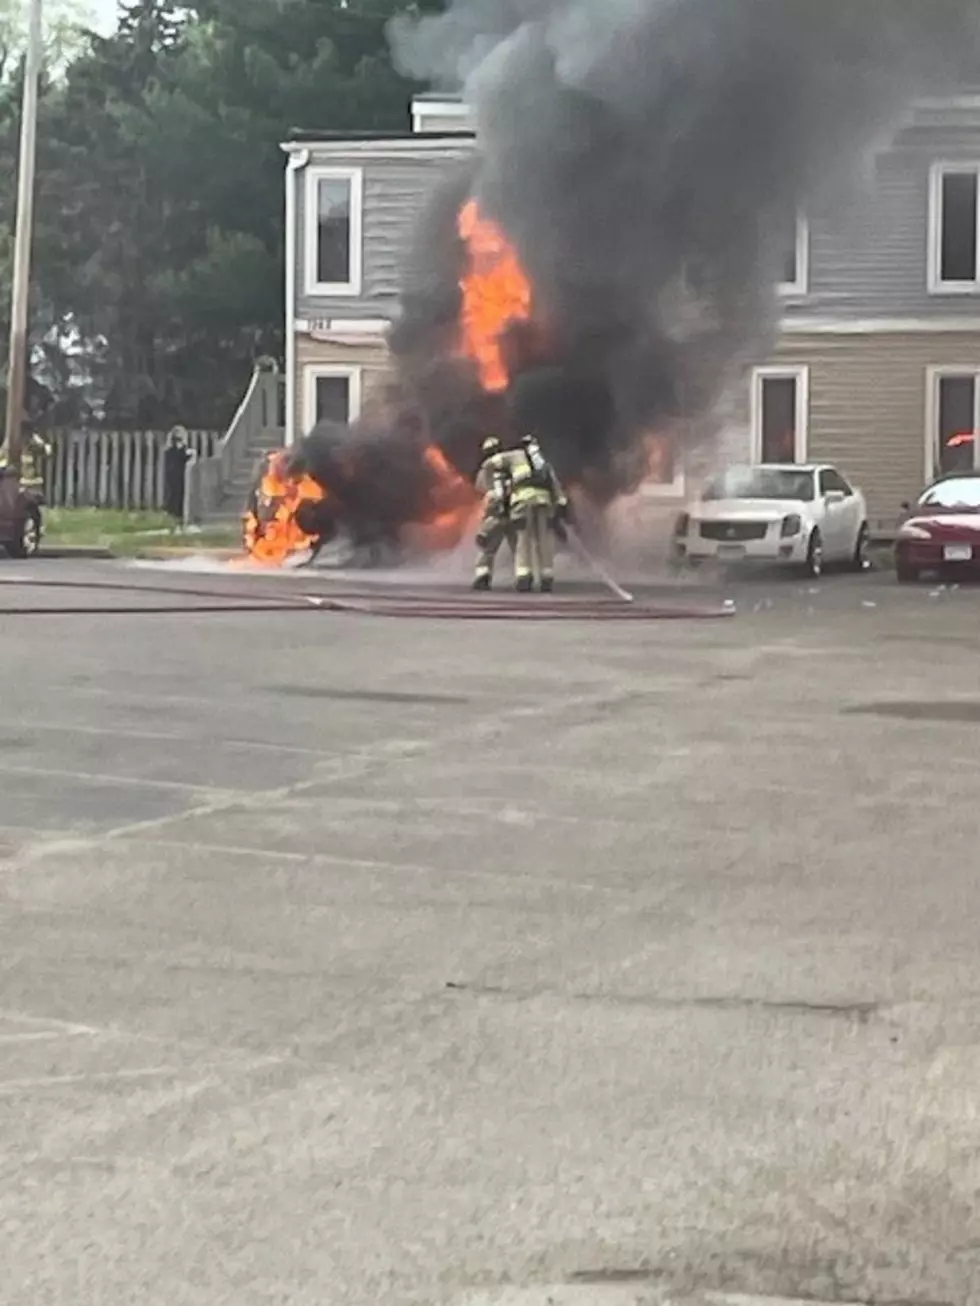 Fire Engulfs Vehicles at Rochester Apartment Complex